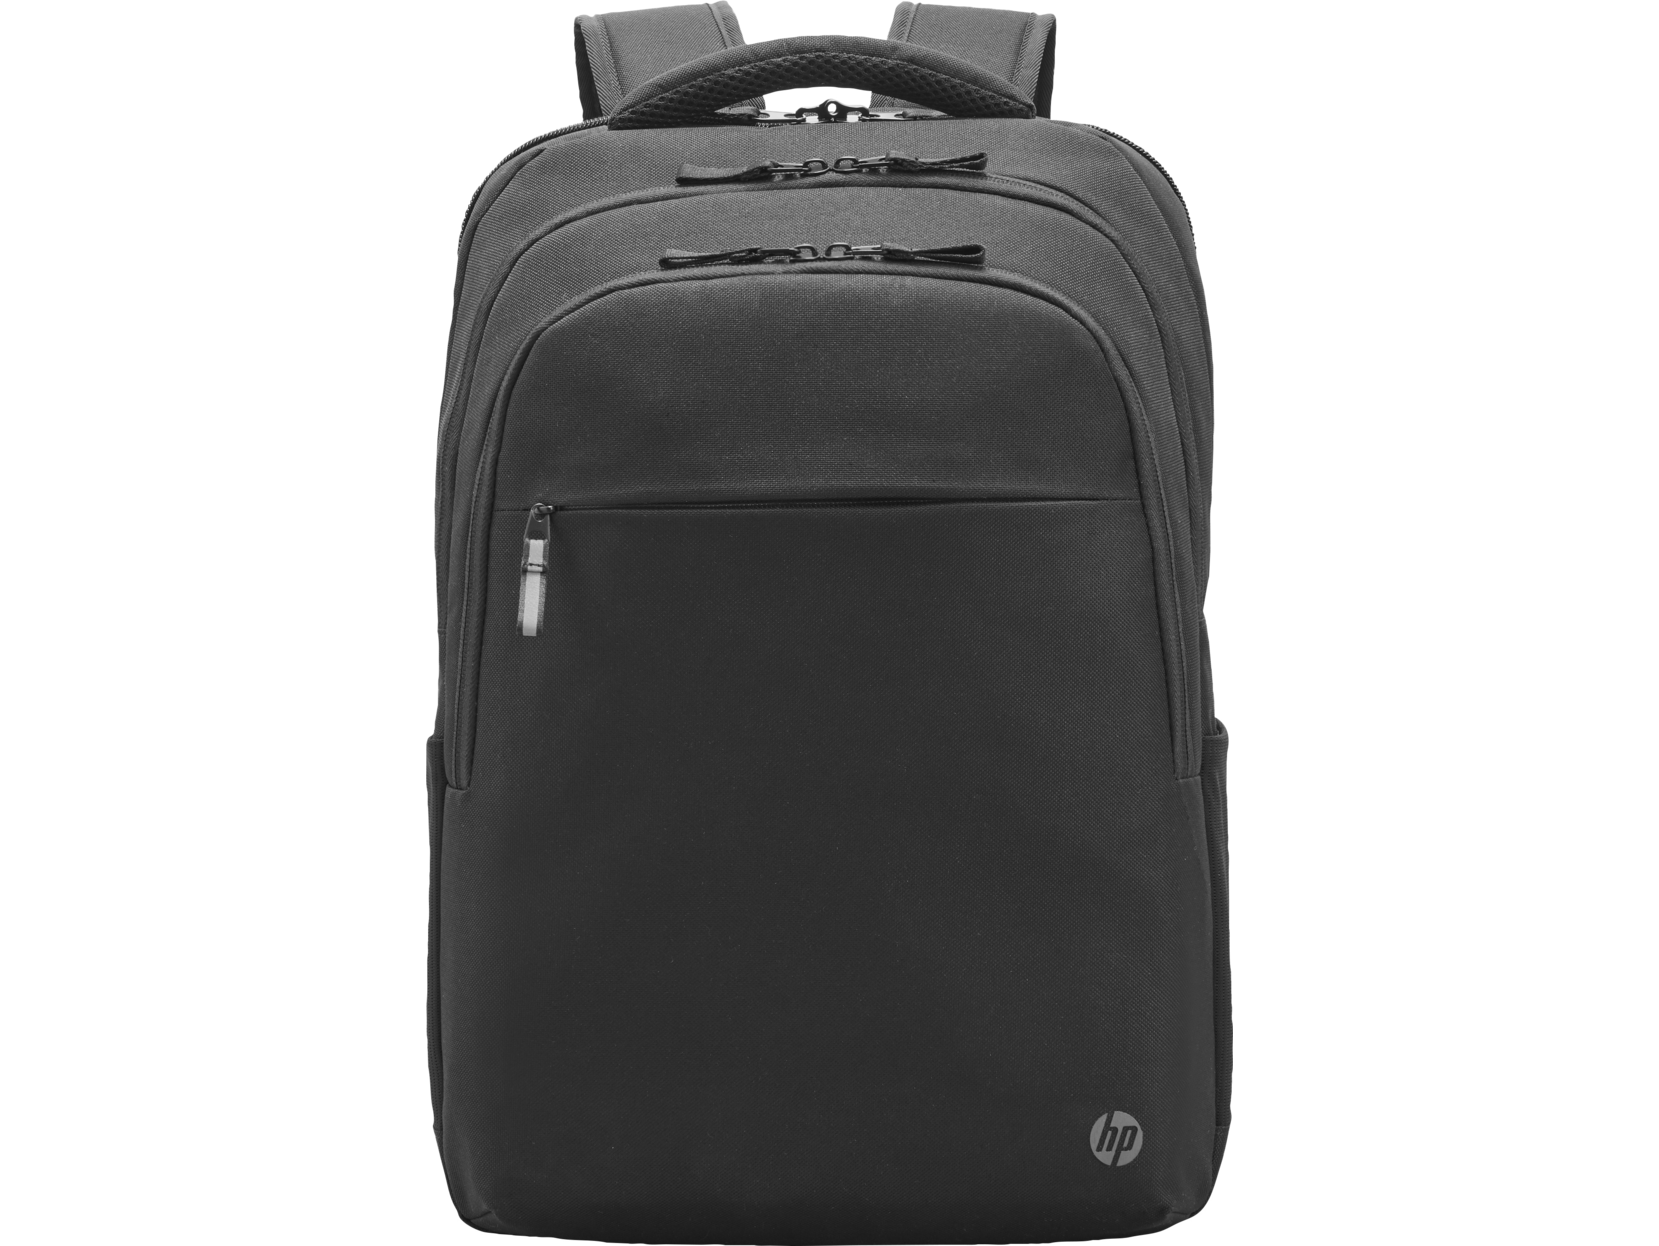 HP RENEW BUSINESS 17.3-INCH LAPTOP BACKPACK